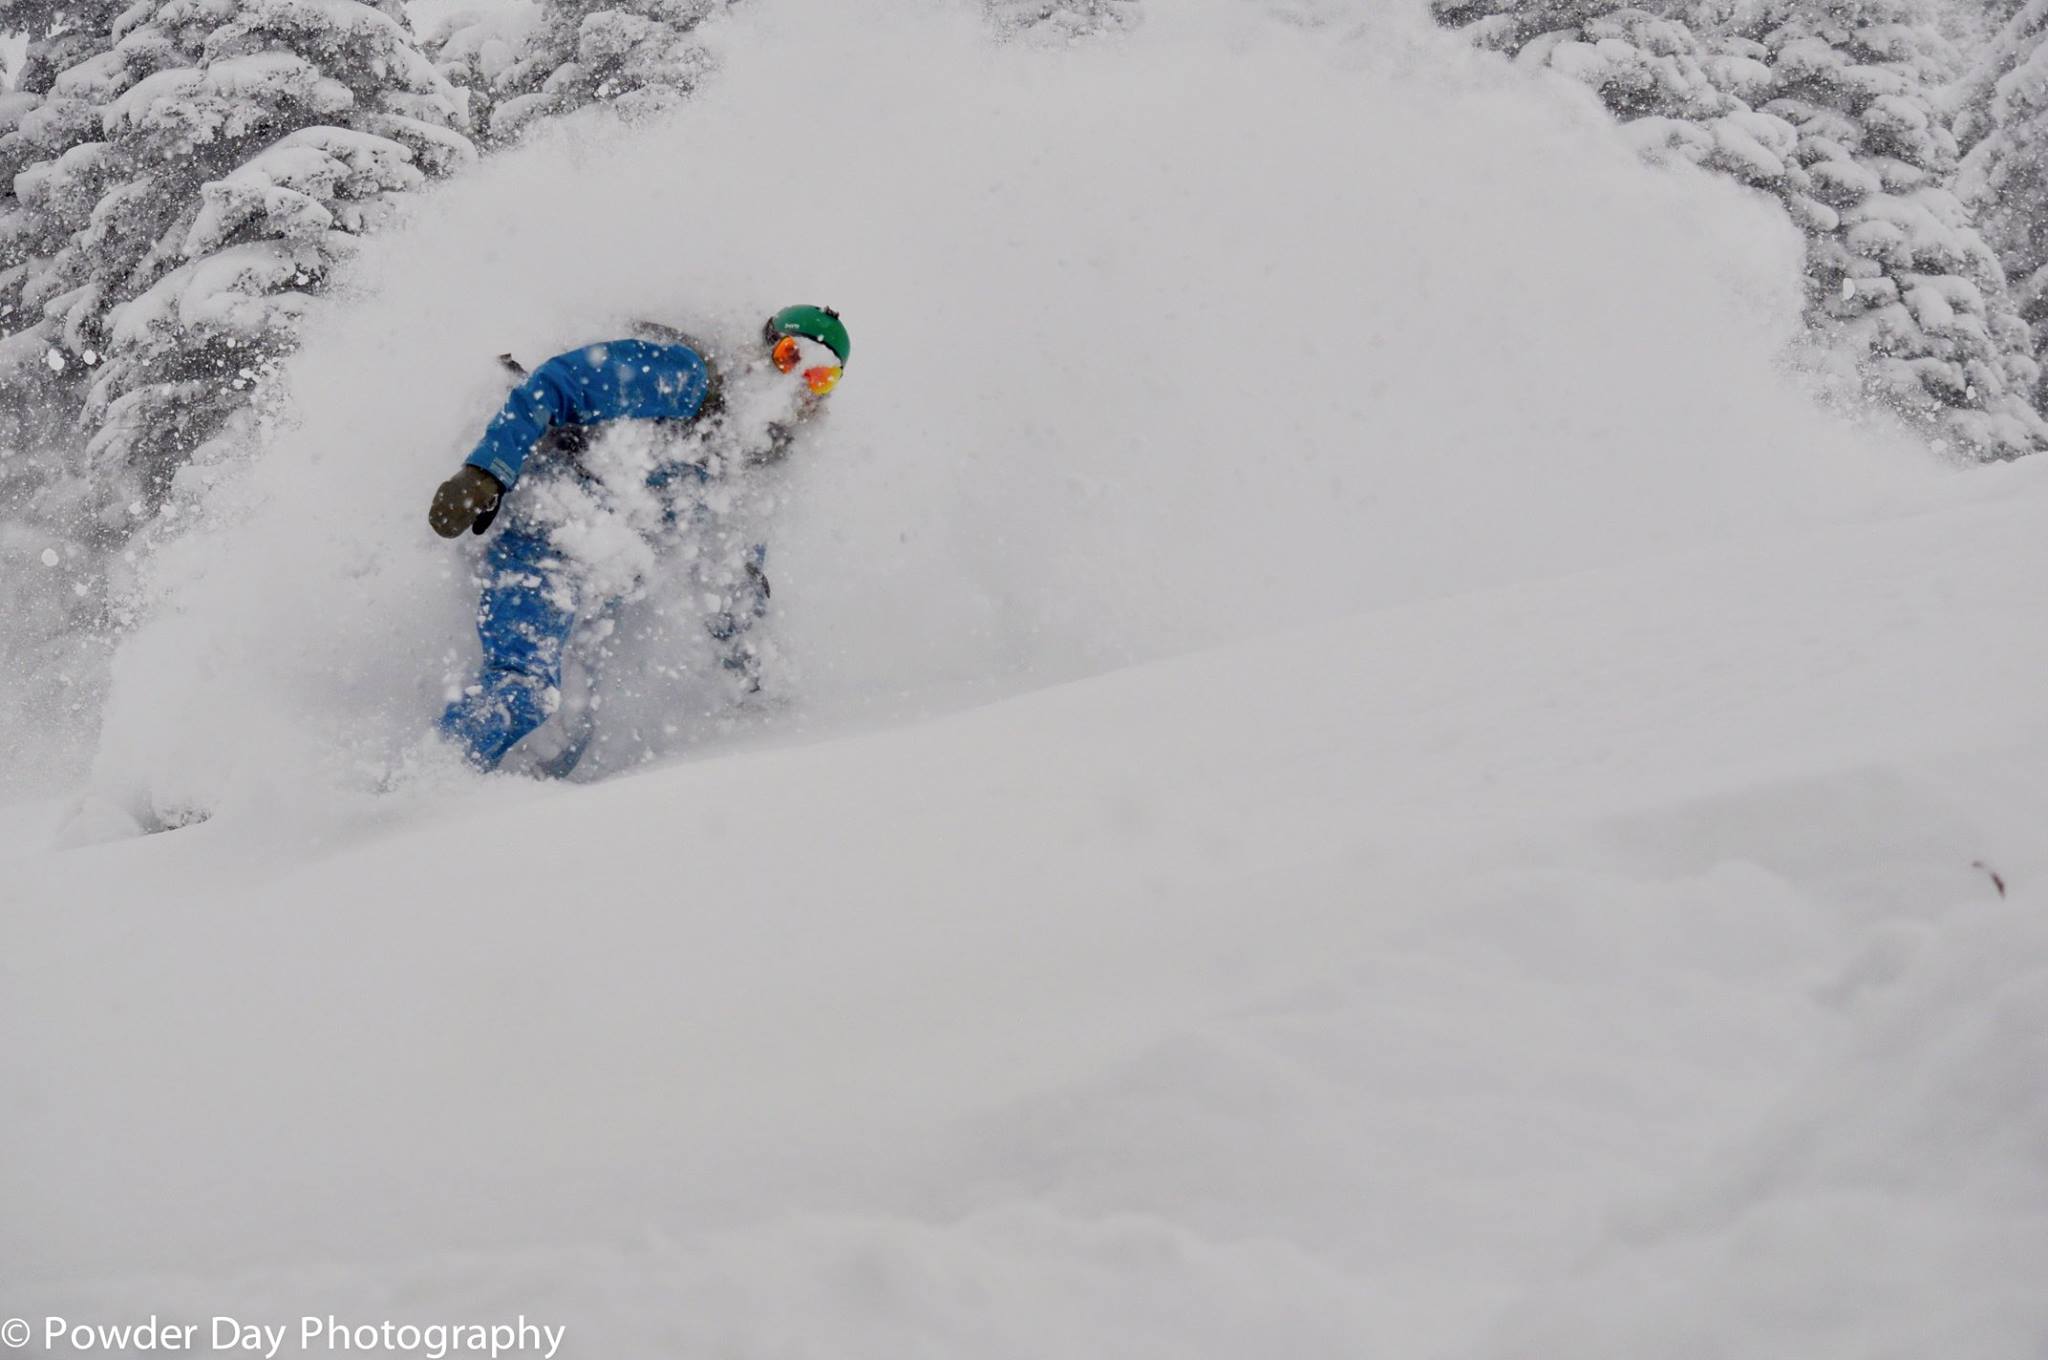 Deep snow at Grand Targhee, WY on December 3rd, 2016. image: powder day productions